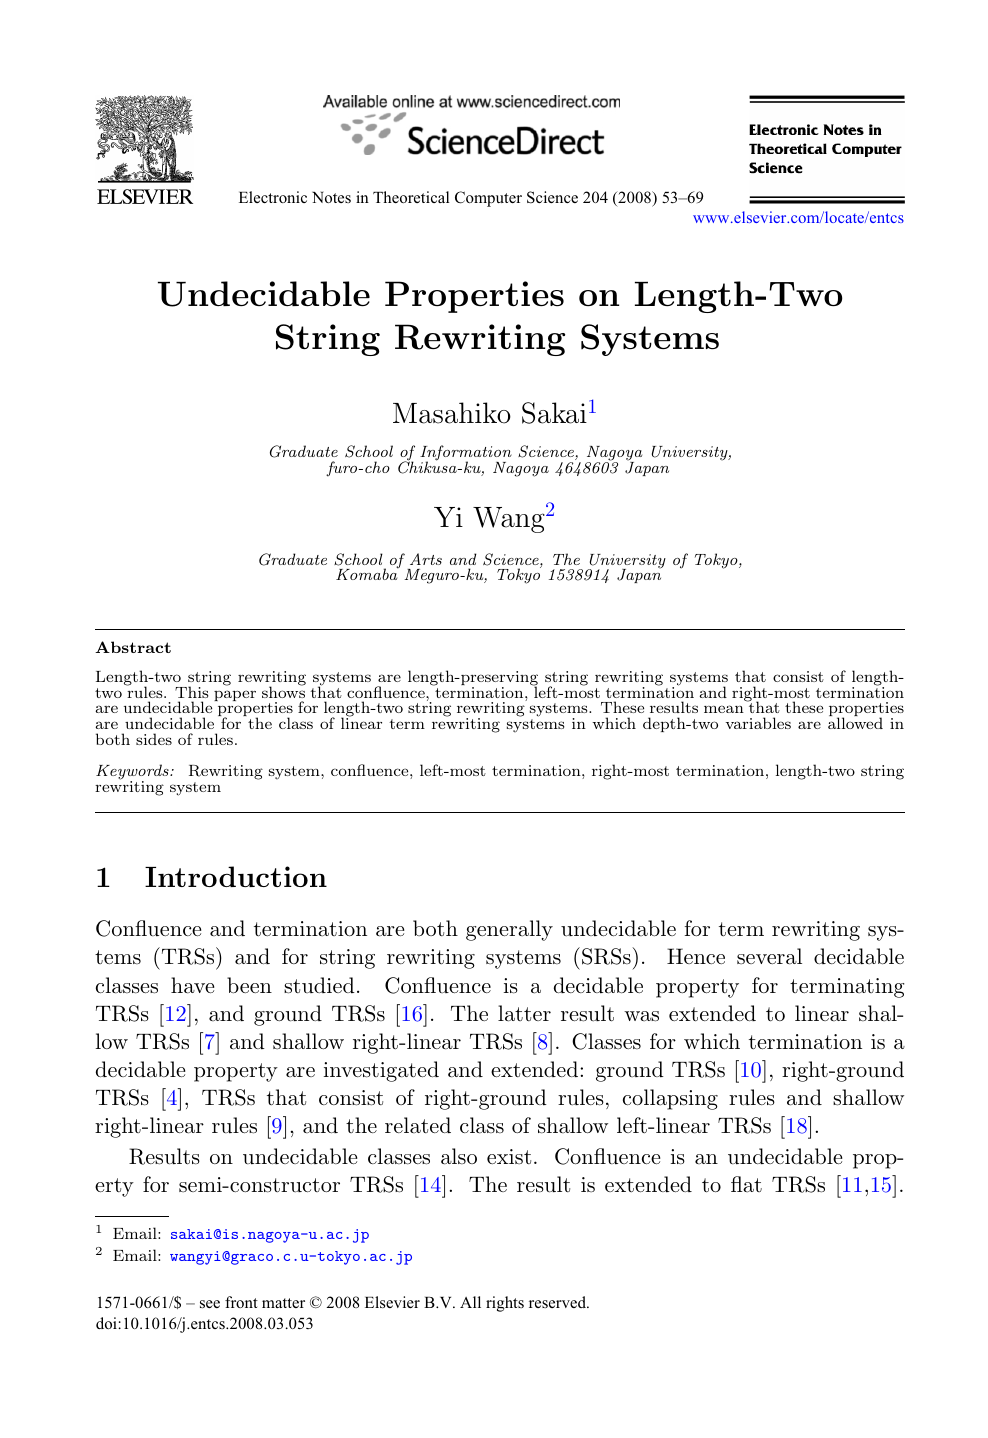 Undecidable Properties On Length Two String Rewriting Systems Topic Of Research Paper In Computer And Information Sciences Download Scholarly Article Pdf And Read For Free On Cyberleninka Open Science Hub